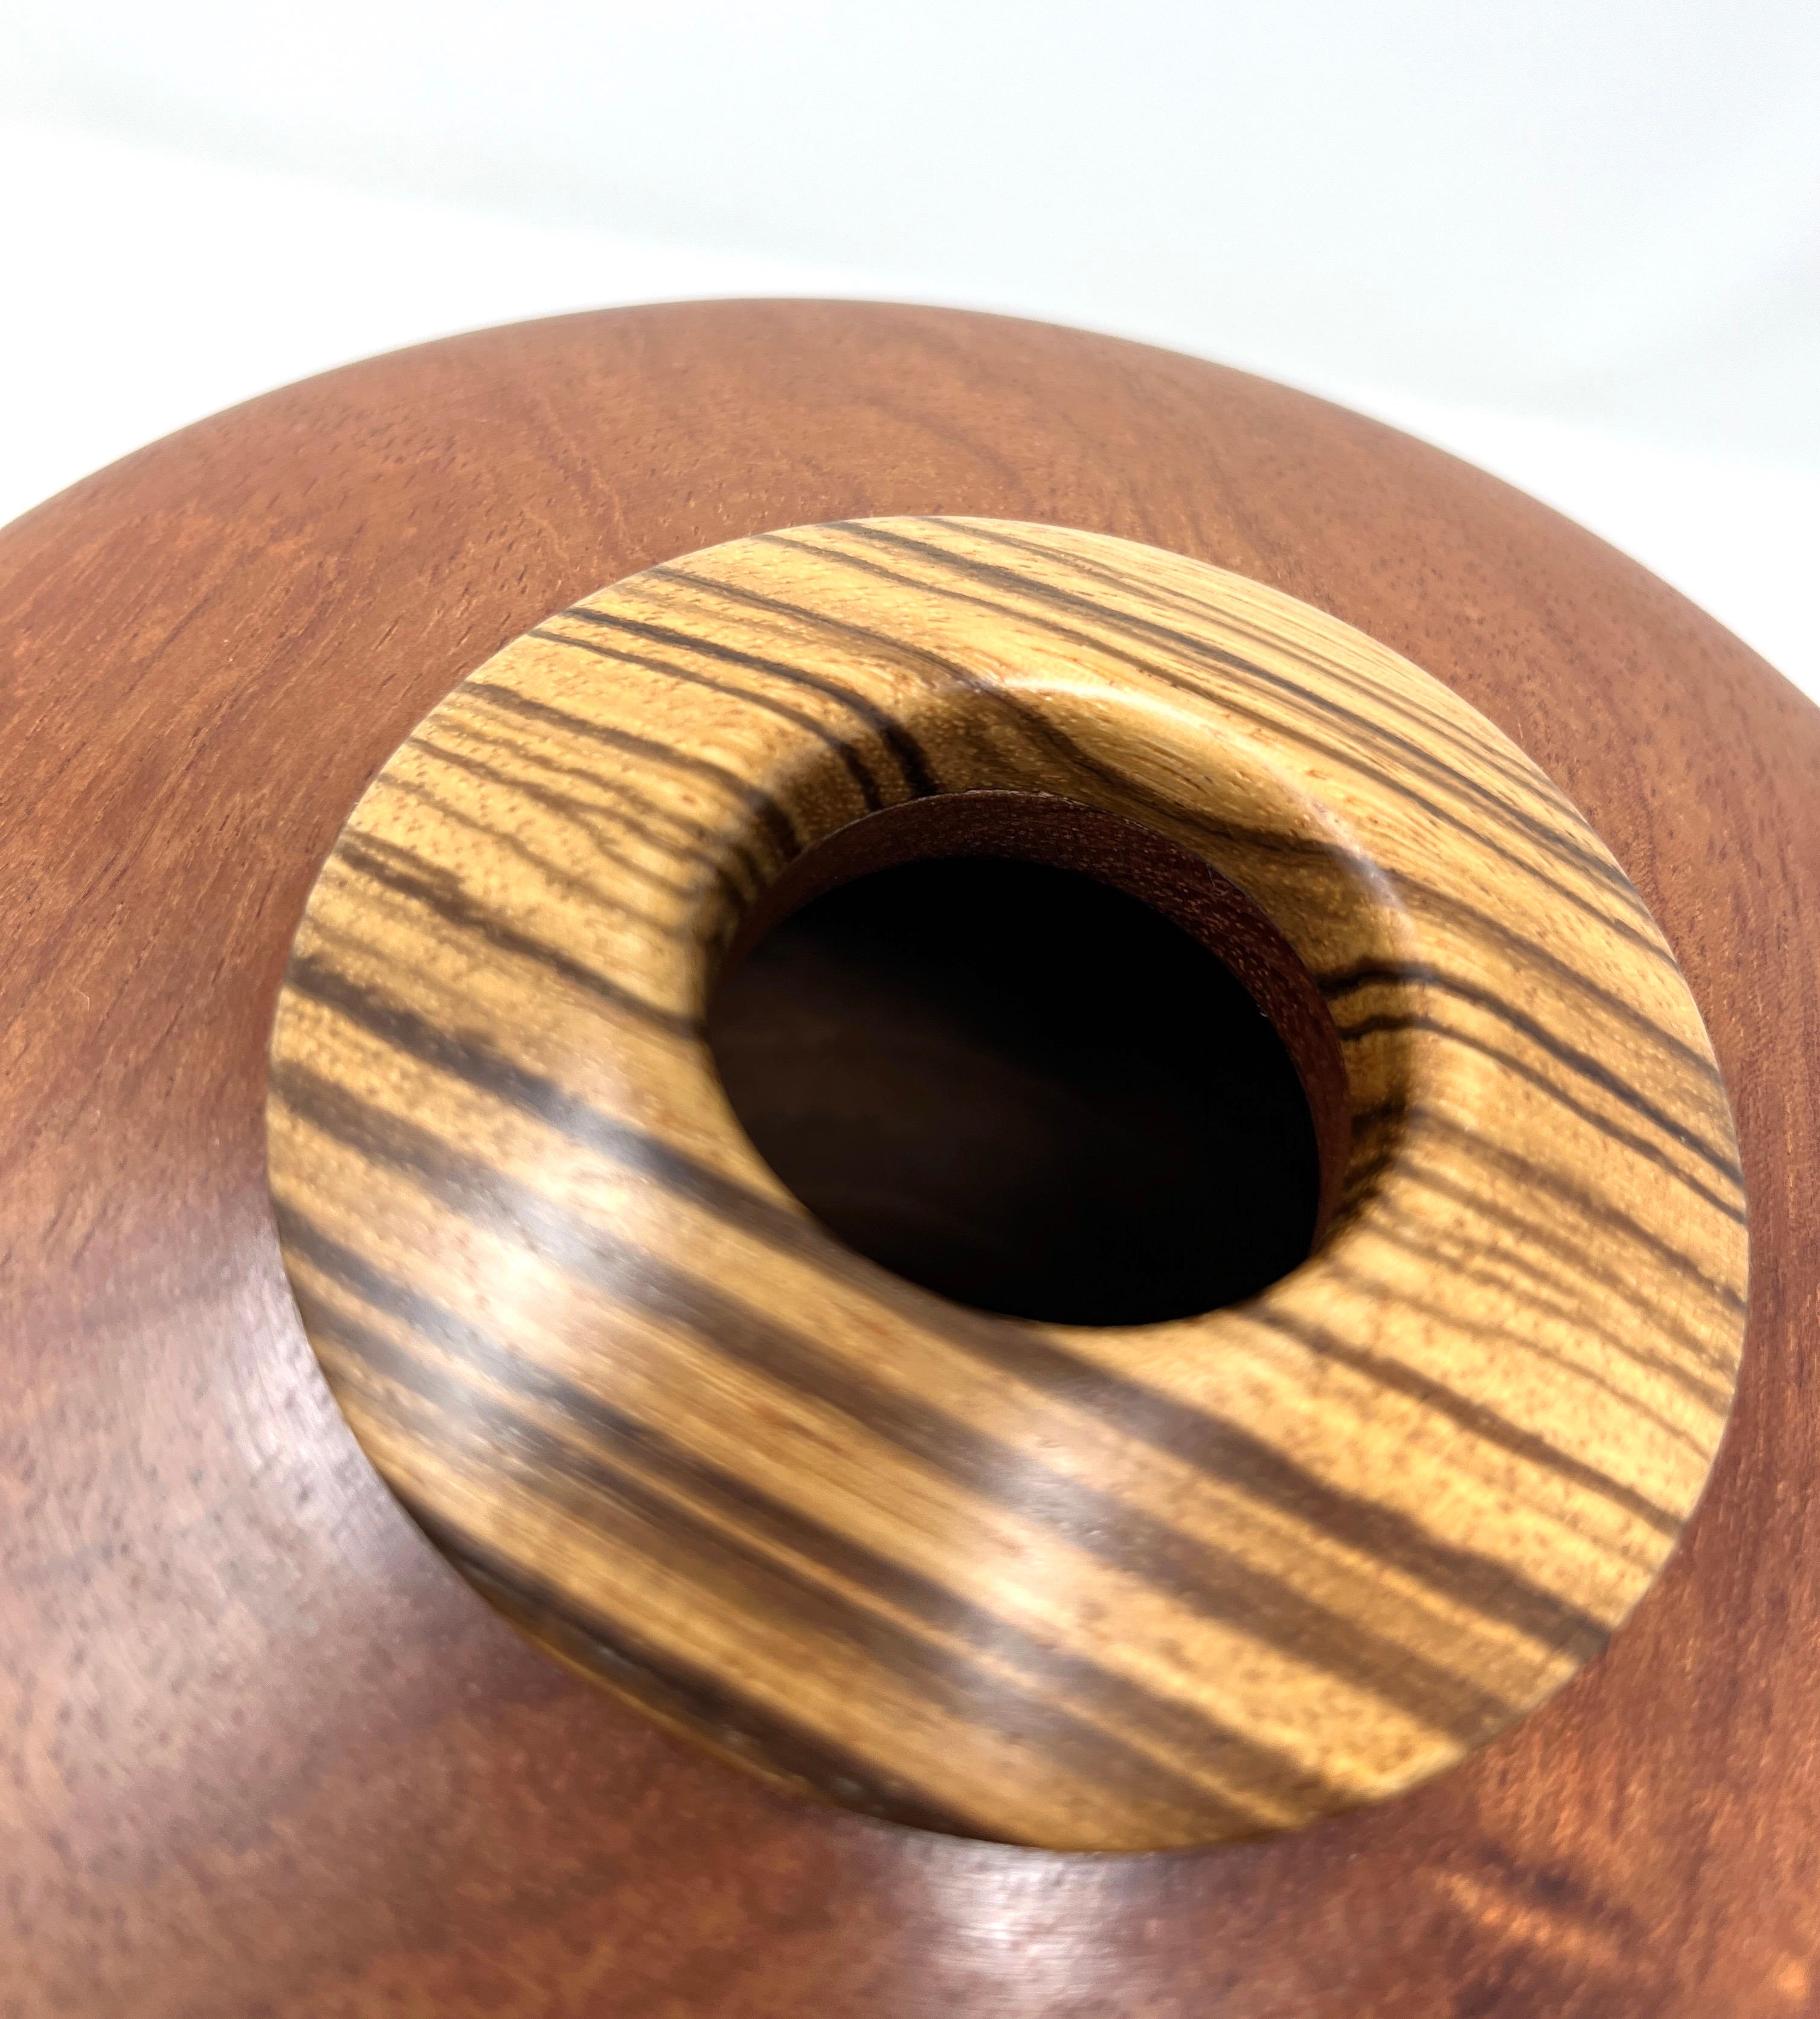 American Handcrafted Turned Wood Sculptural Vase By Lloyd Cheney, 2002 For Sale